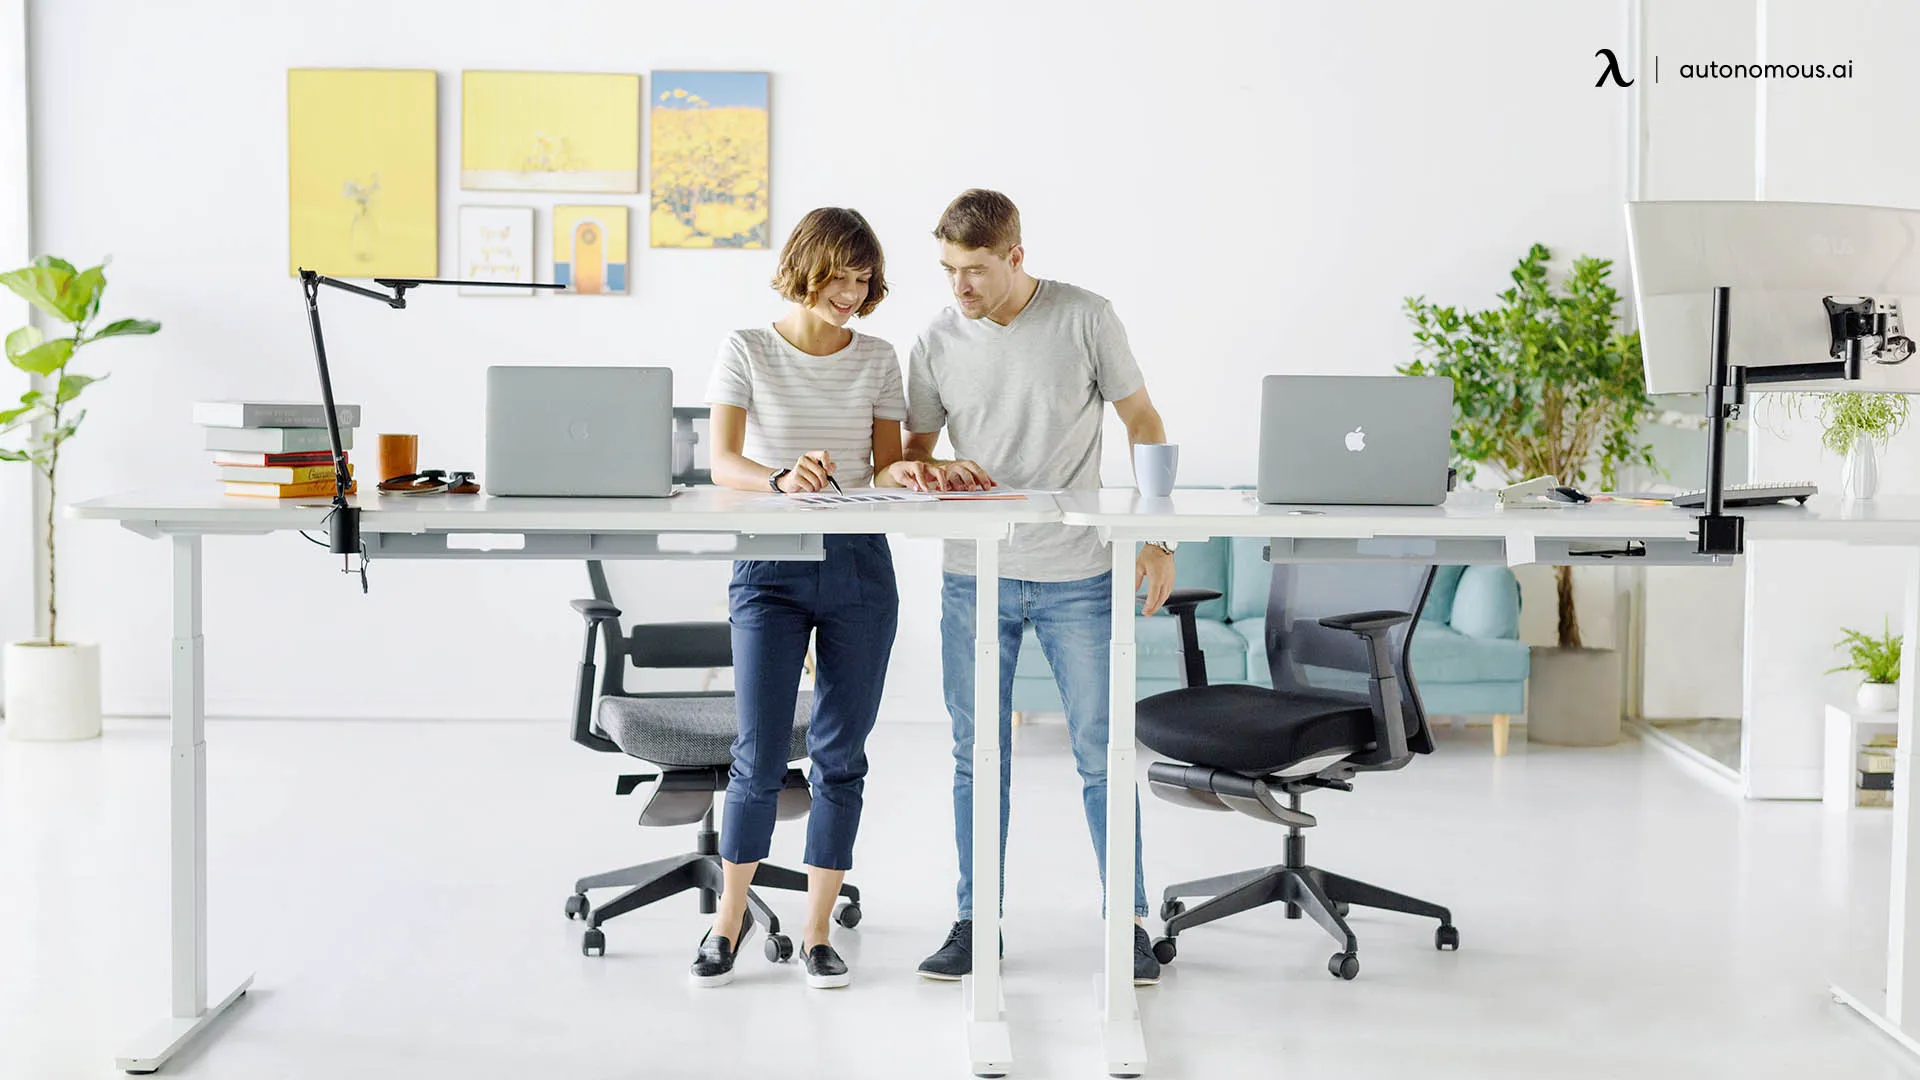 Find Out If Your Company Has A Standing Desk Policy